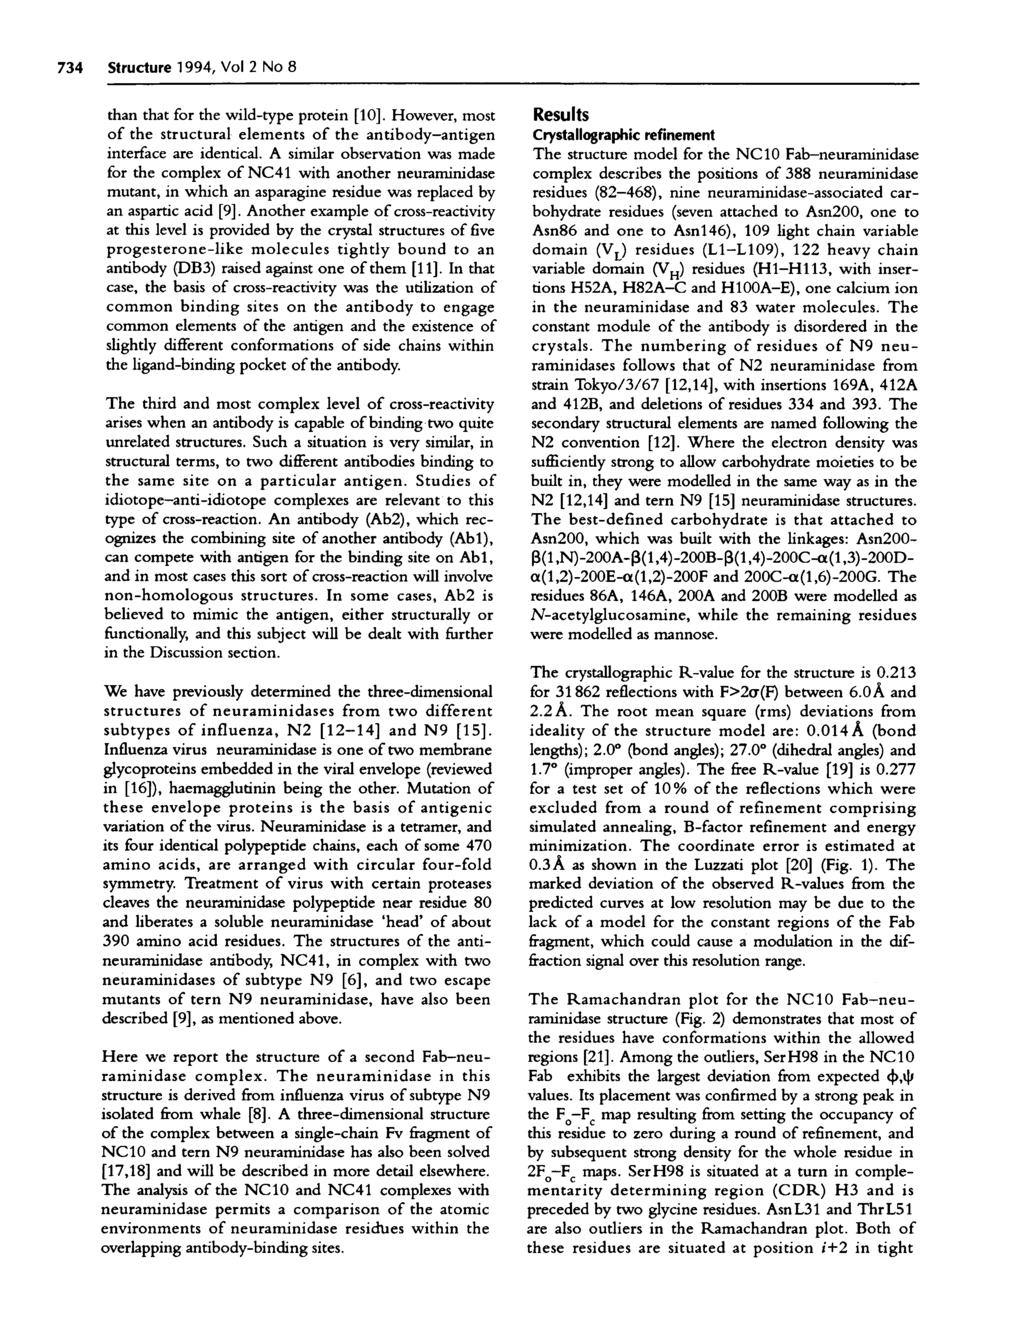 734 Structure 1994, Vol 2 No 8 than that for the wild-type protein [10]. However, most of the structural elements of the antibody-antigen interface are identical.